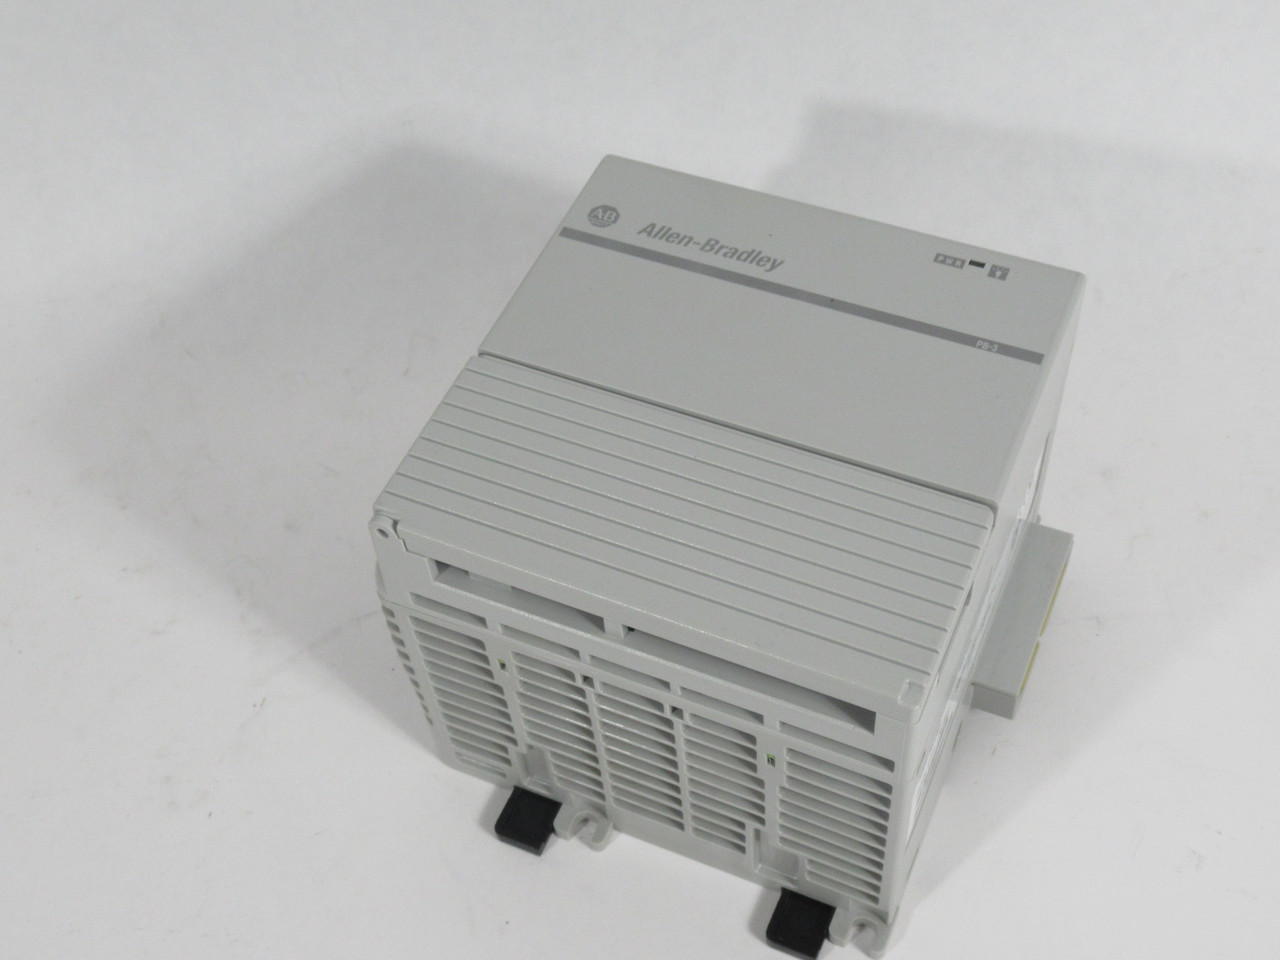 Allen-Bradley 1768-PB3 Series A CompactLogix Power Supply 3.5A@24VDC USED